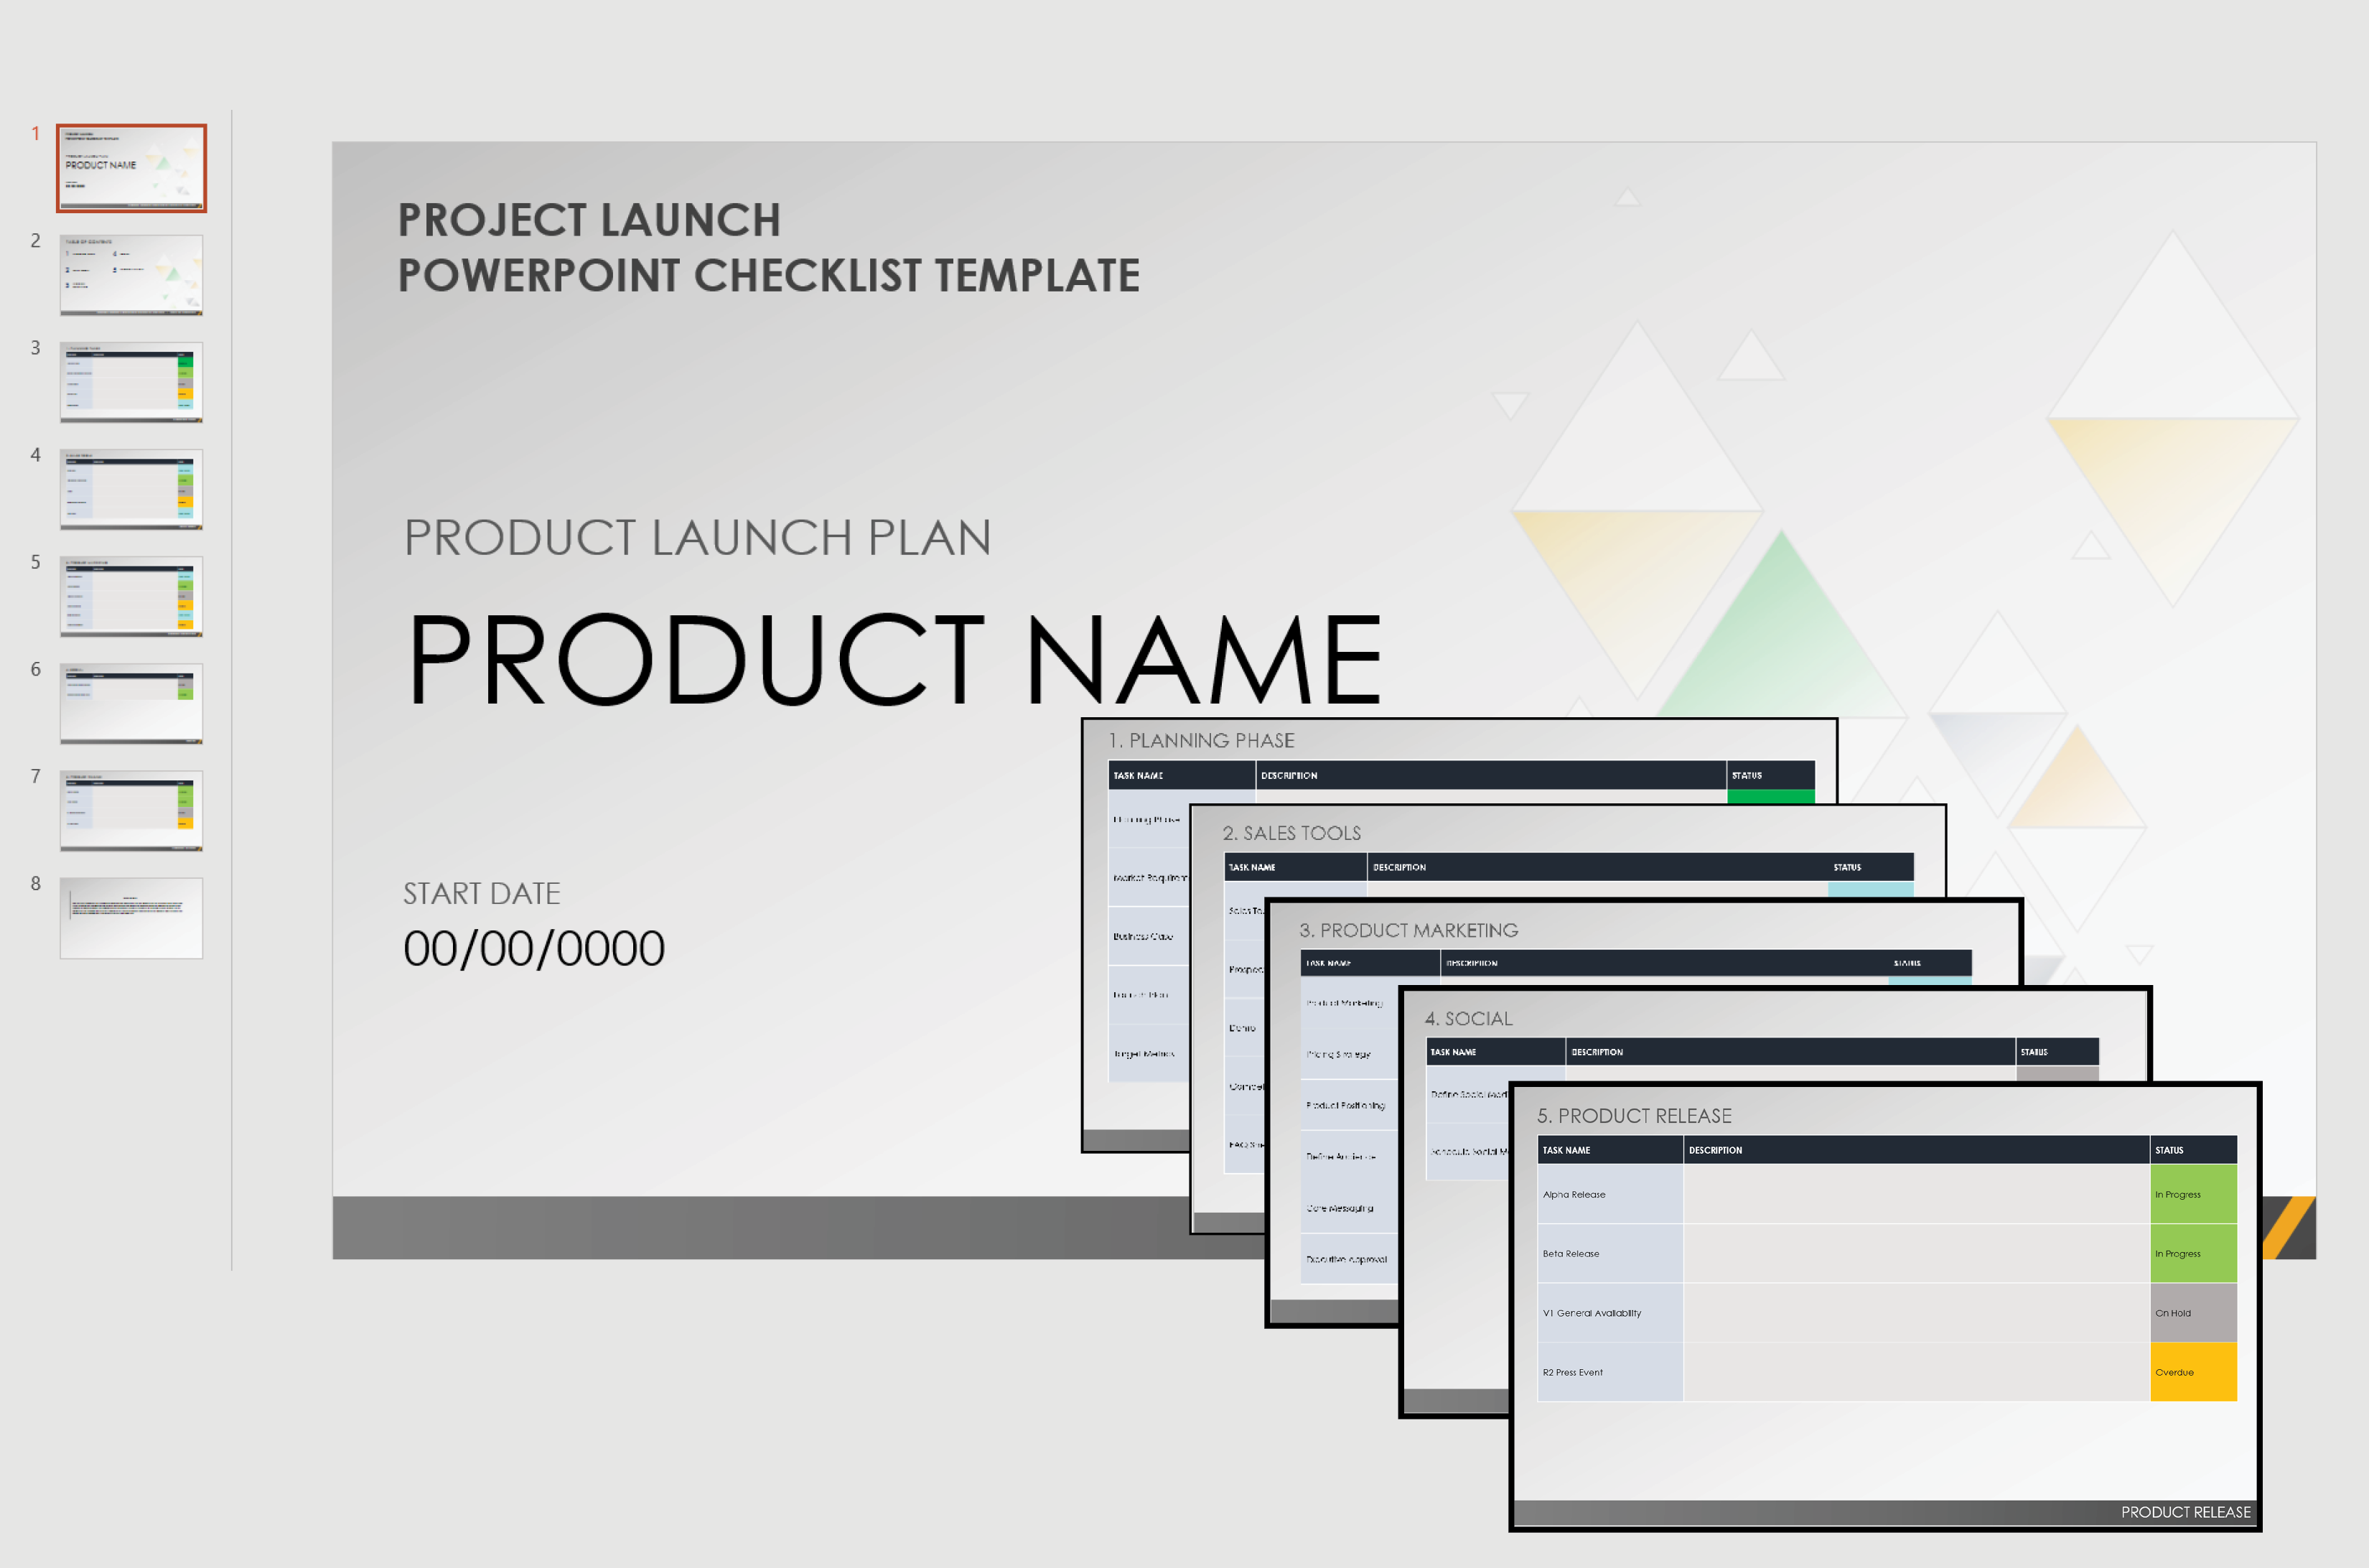 Product Launch Plan Checklist